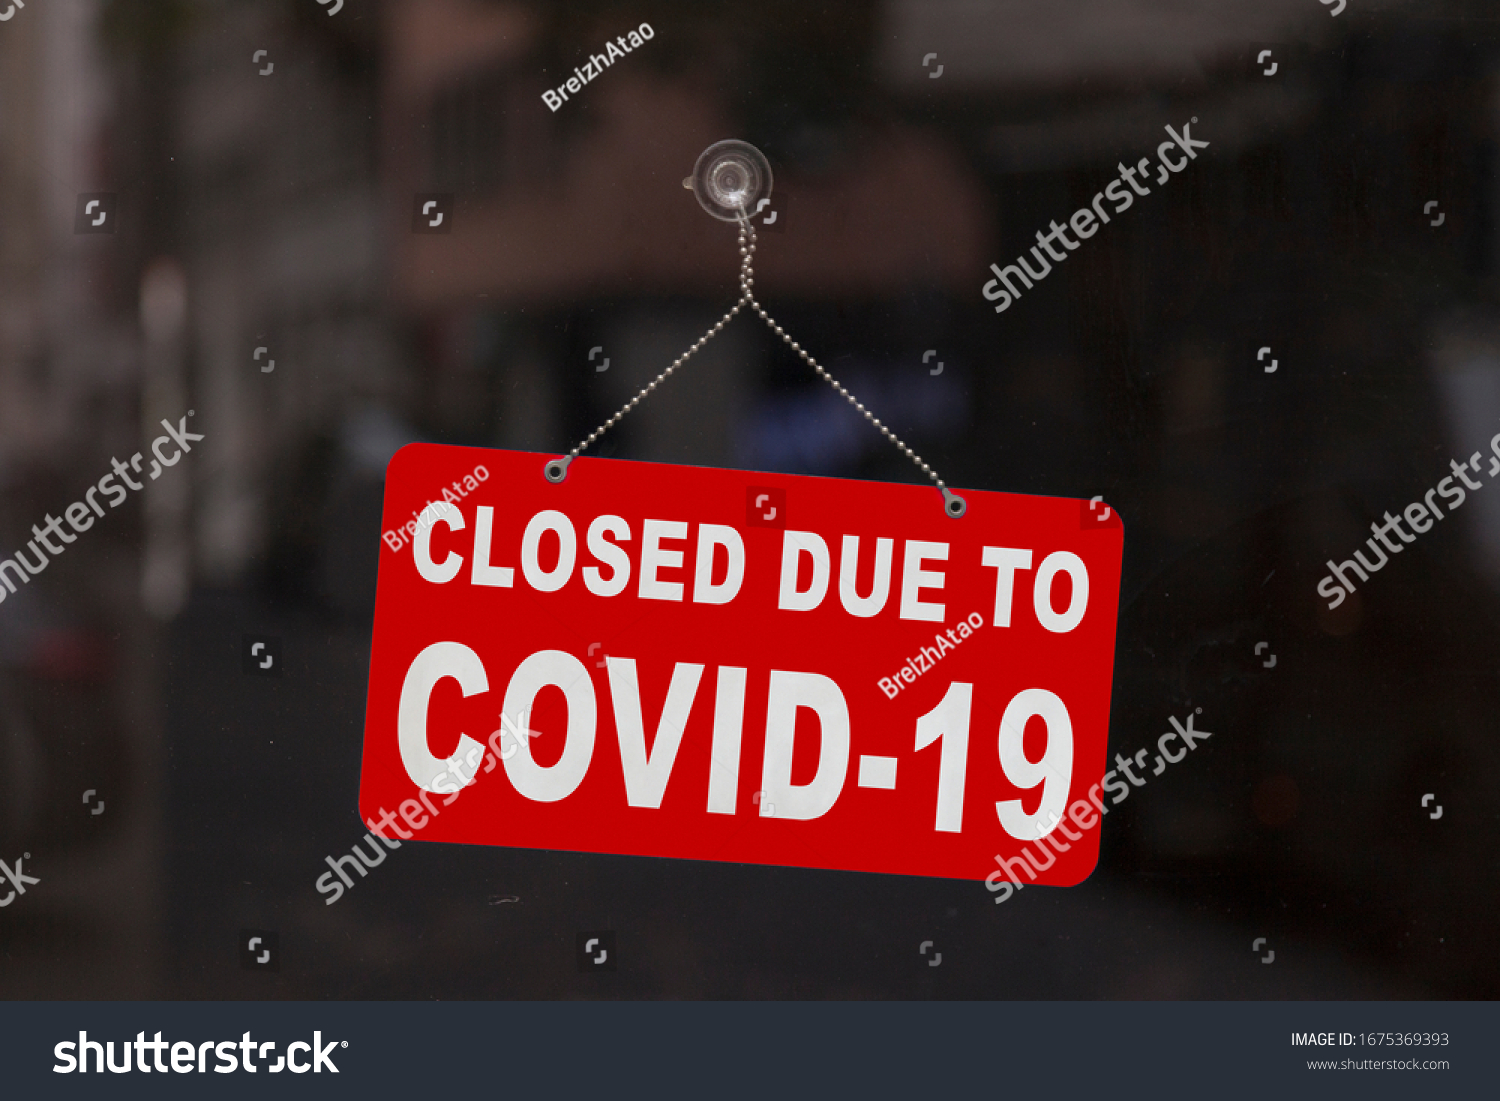 Close-up on a red closed sign in the window of a shop displaying the message "Closed due to Covid-19". #1675369393